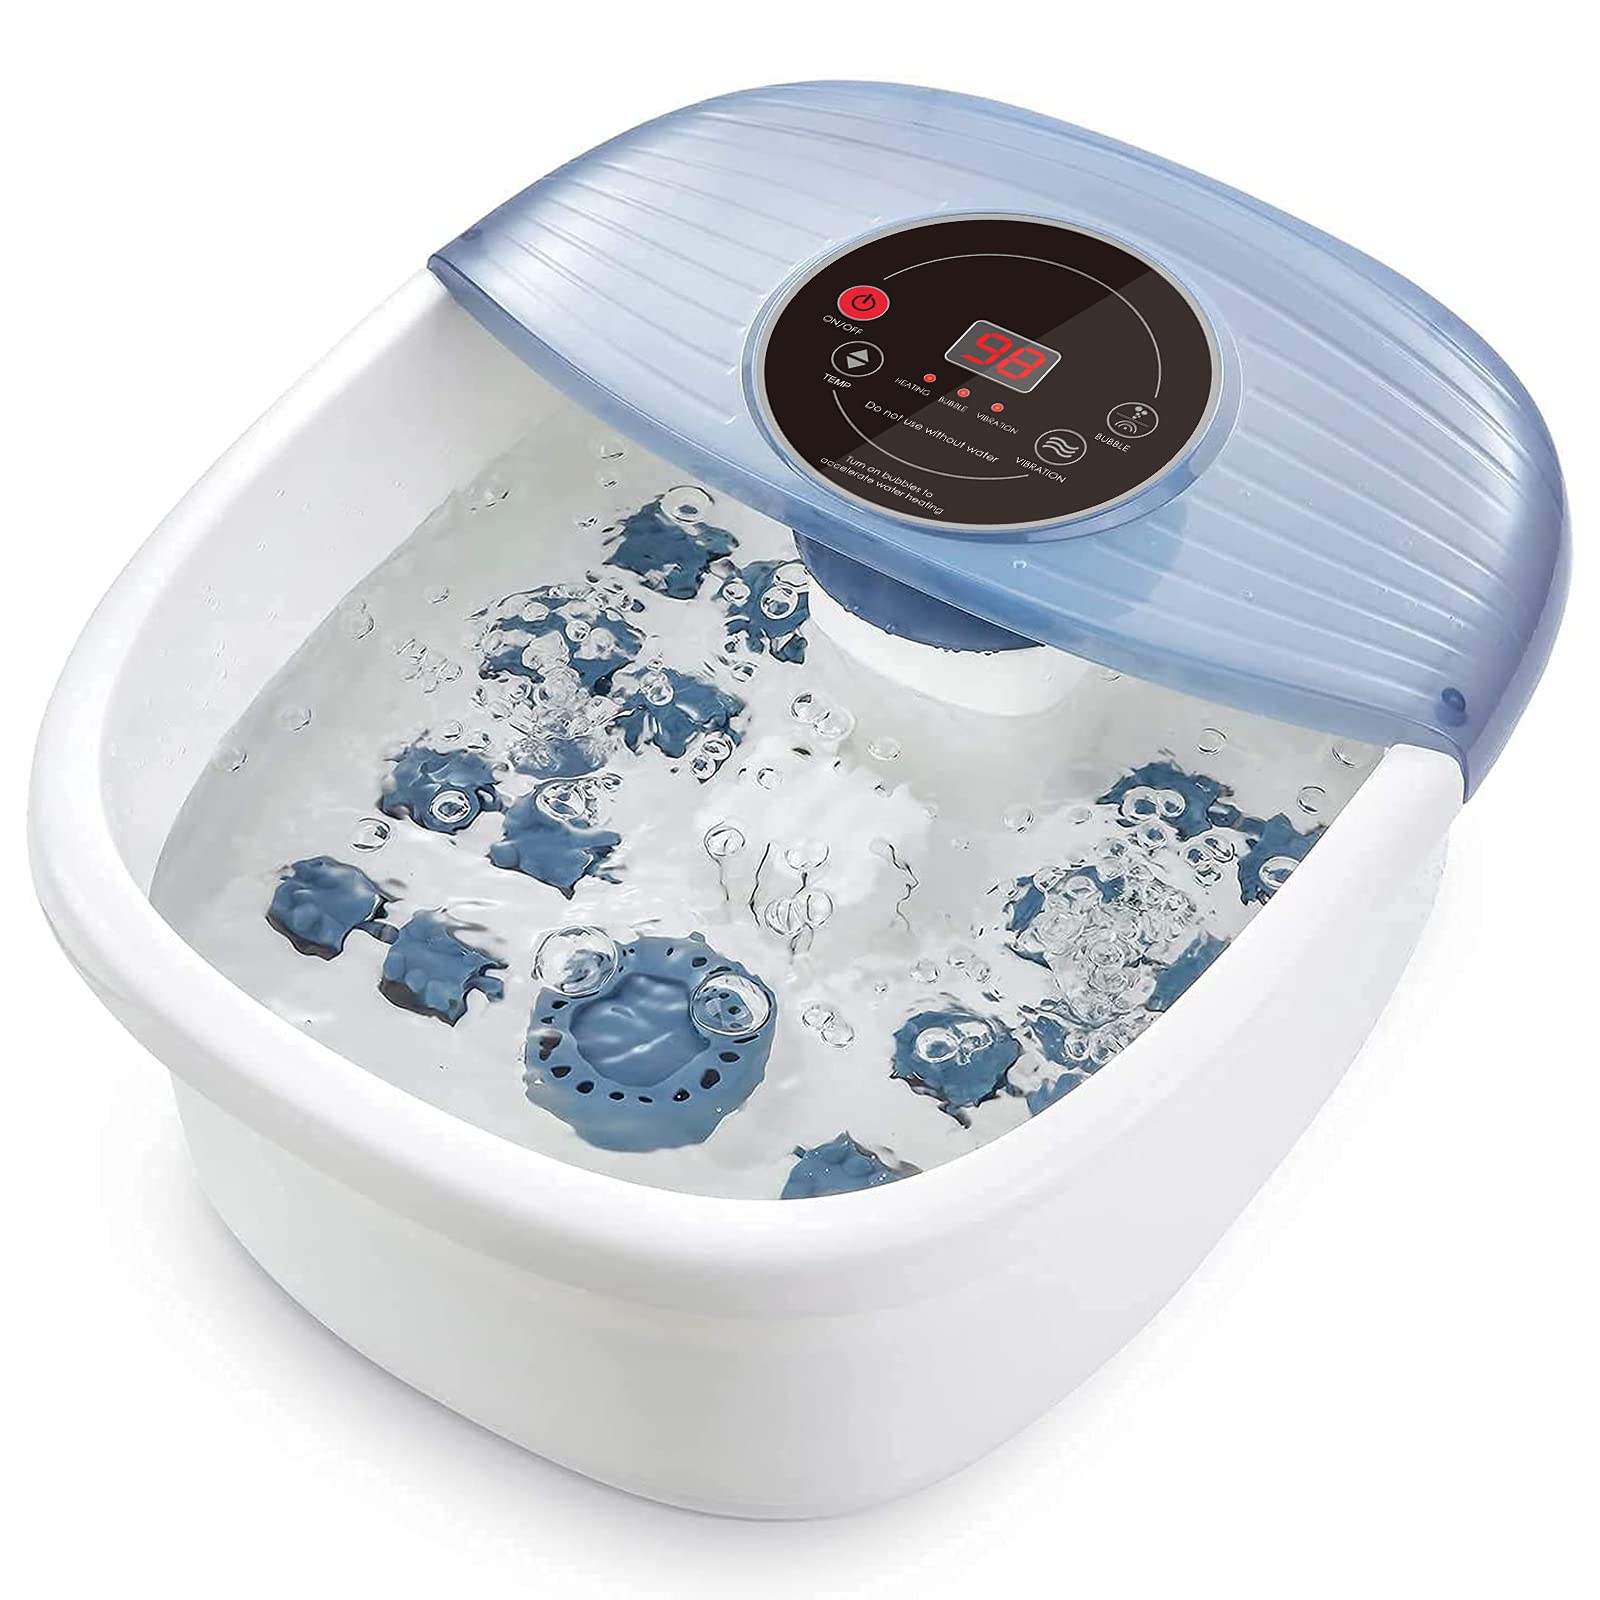 Foot Spa Bath Massager with Heat, Bubble and Vibration, Digital Temperature Control (95-118℉) and 16 Detachable Massage Rollers for Comfort Feet, Home Use